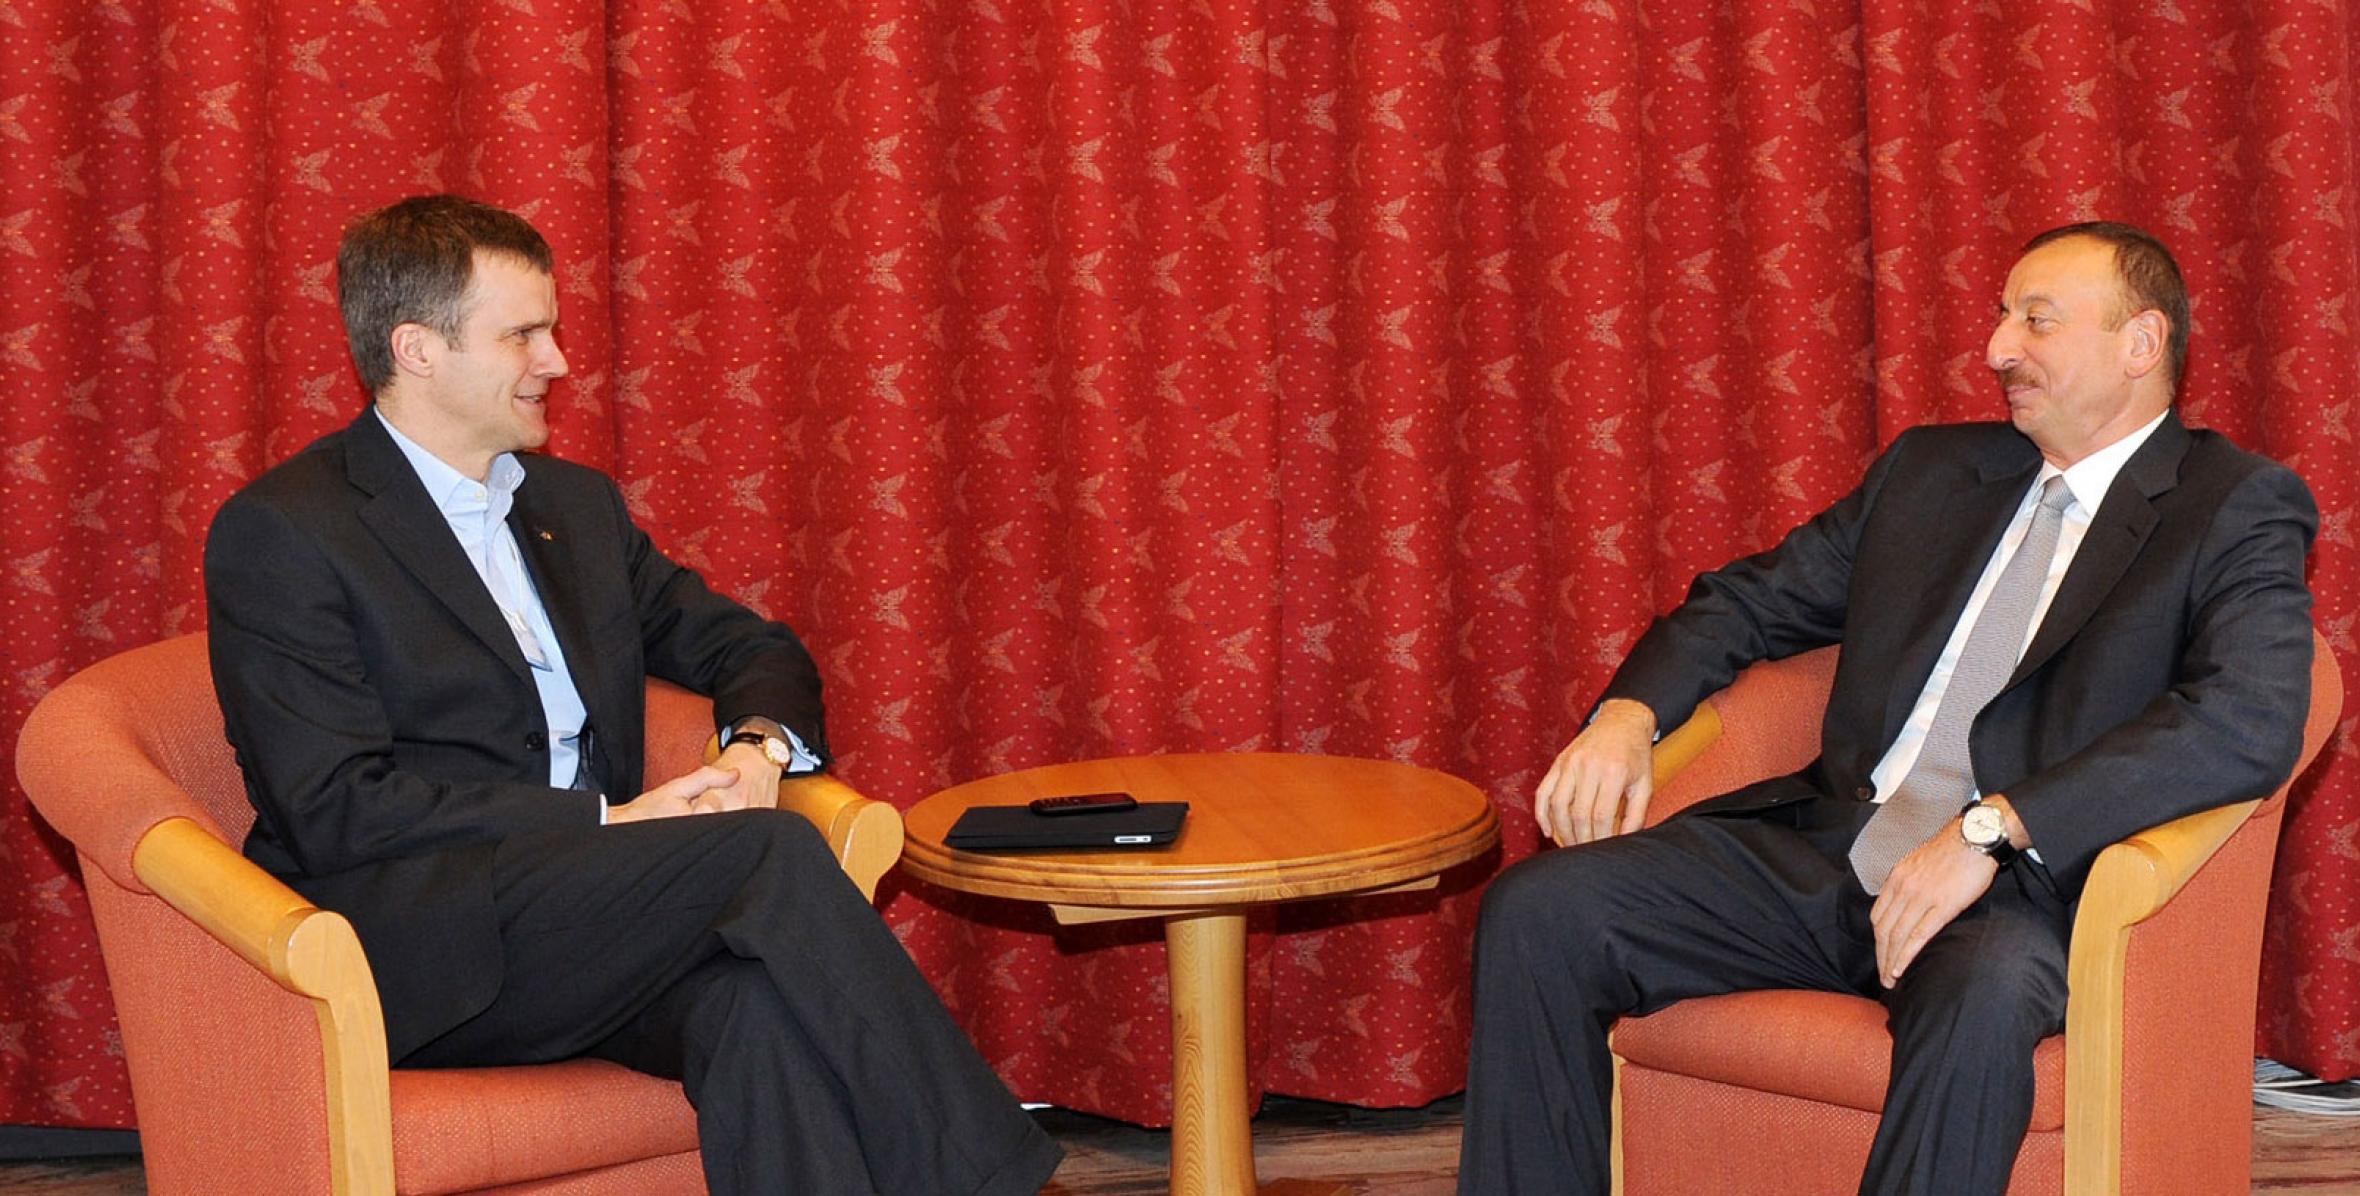 President Ilham Aliyev met with President and CEO of the “Statoil ASA” company, Helge Lund